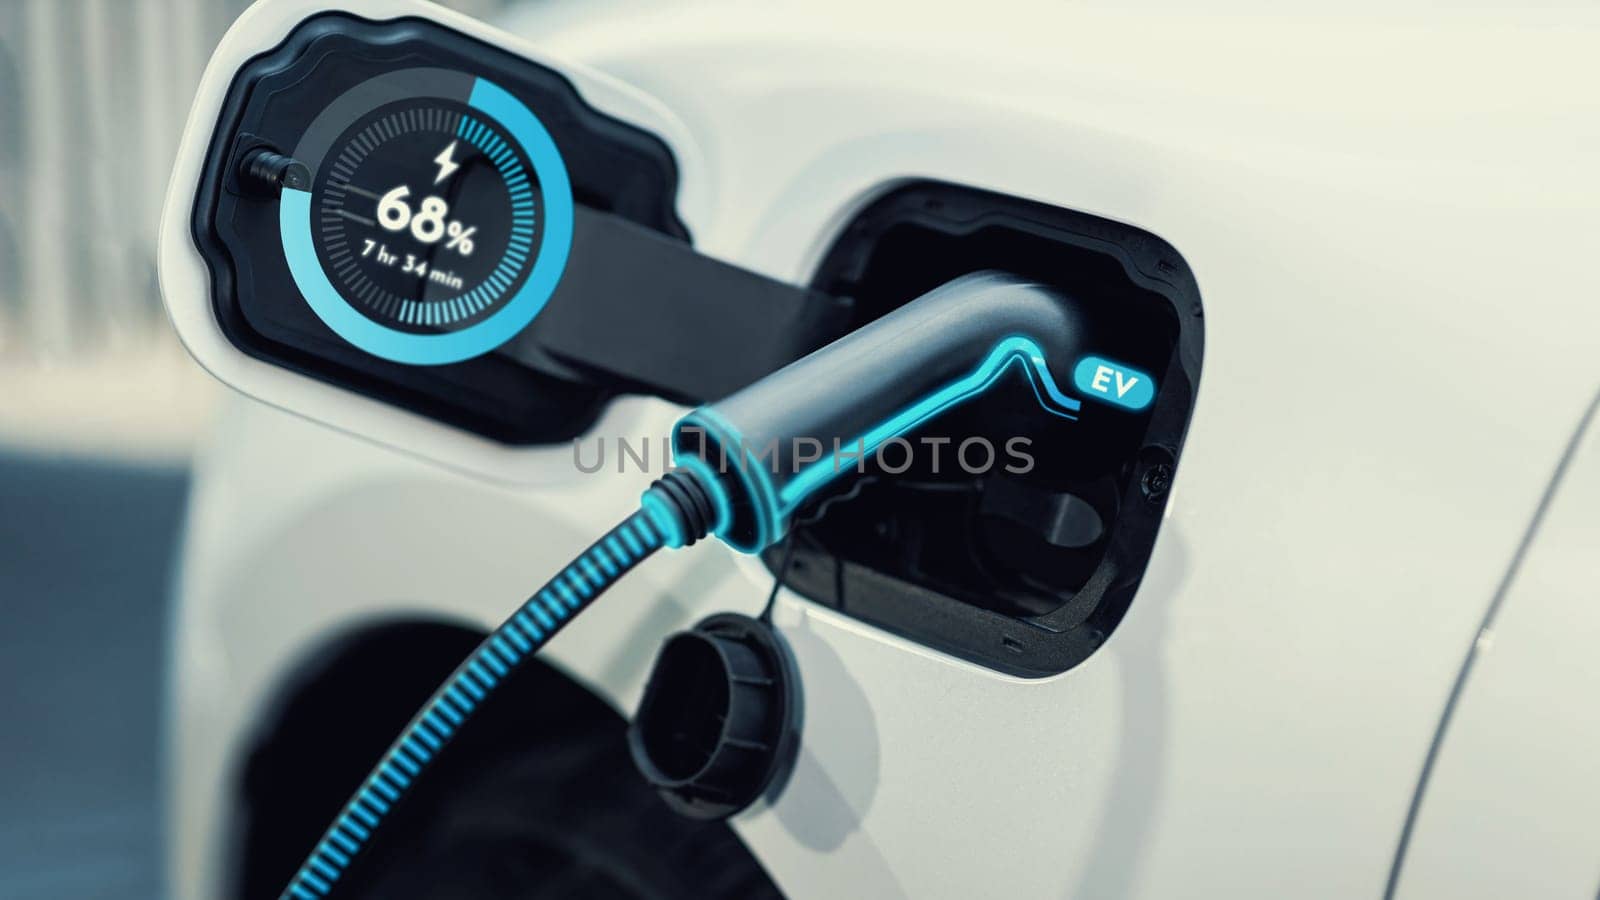 EV charger from home charging station recharging electric car. Peruse by biancoblue